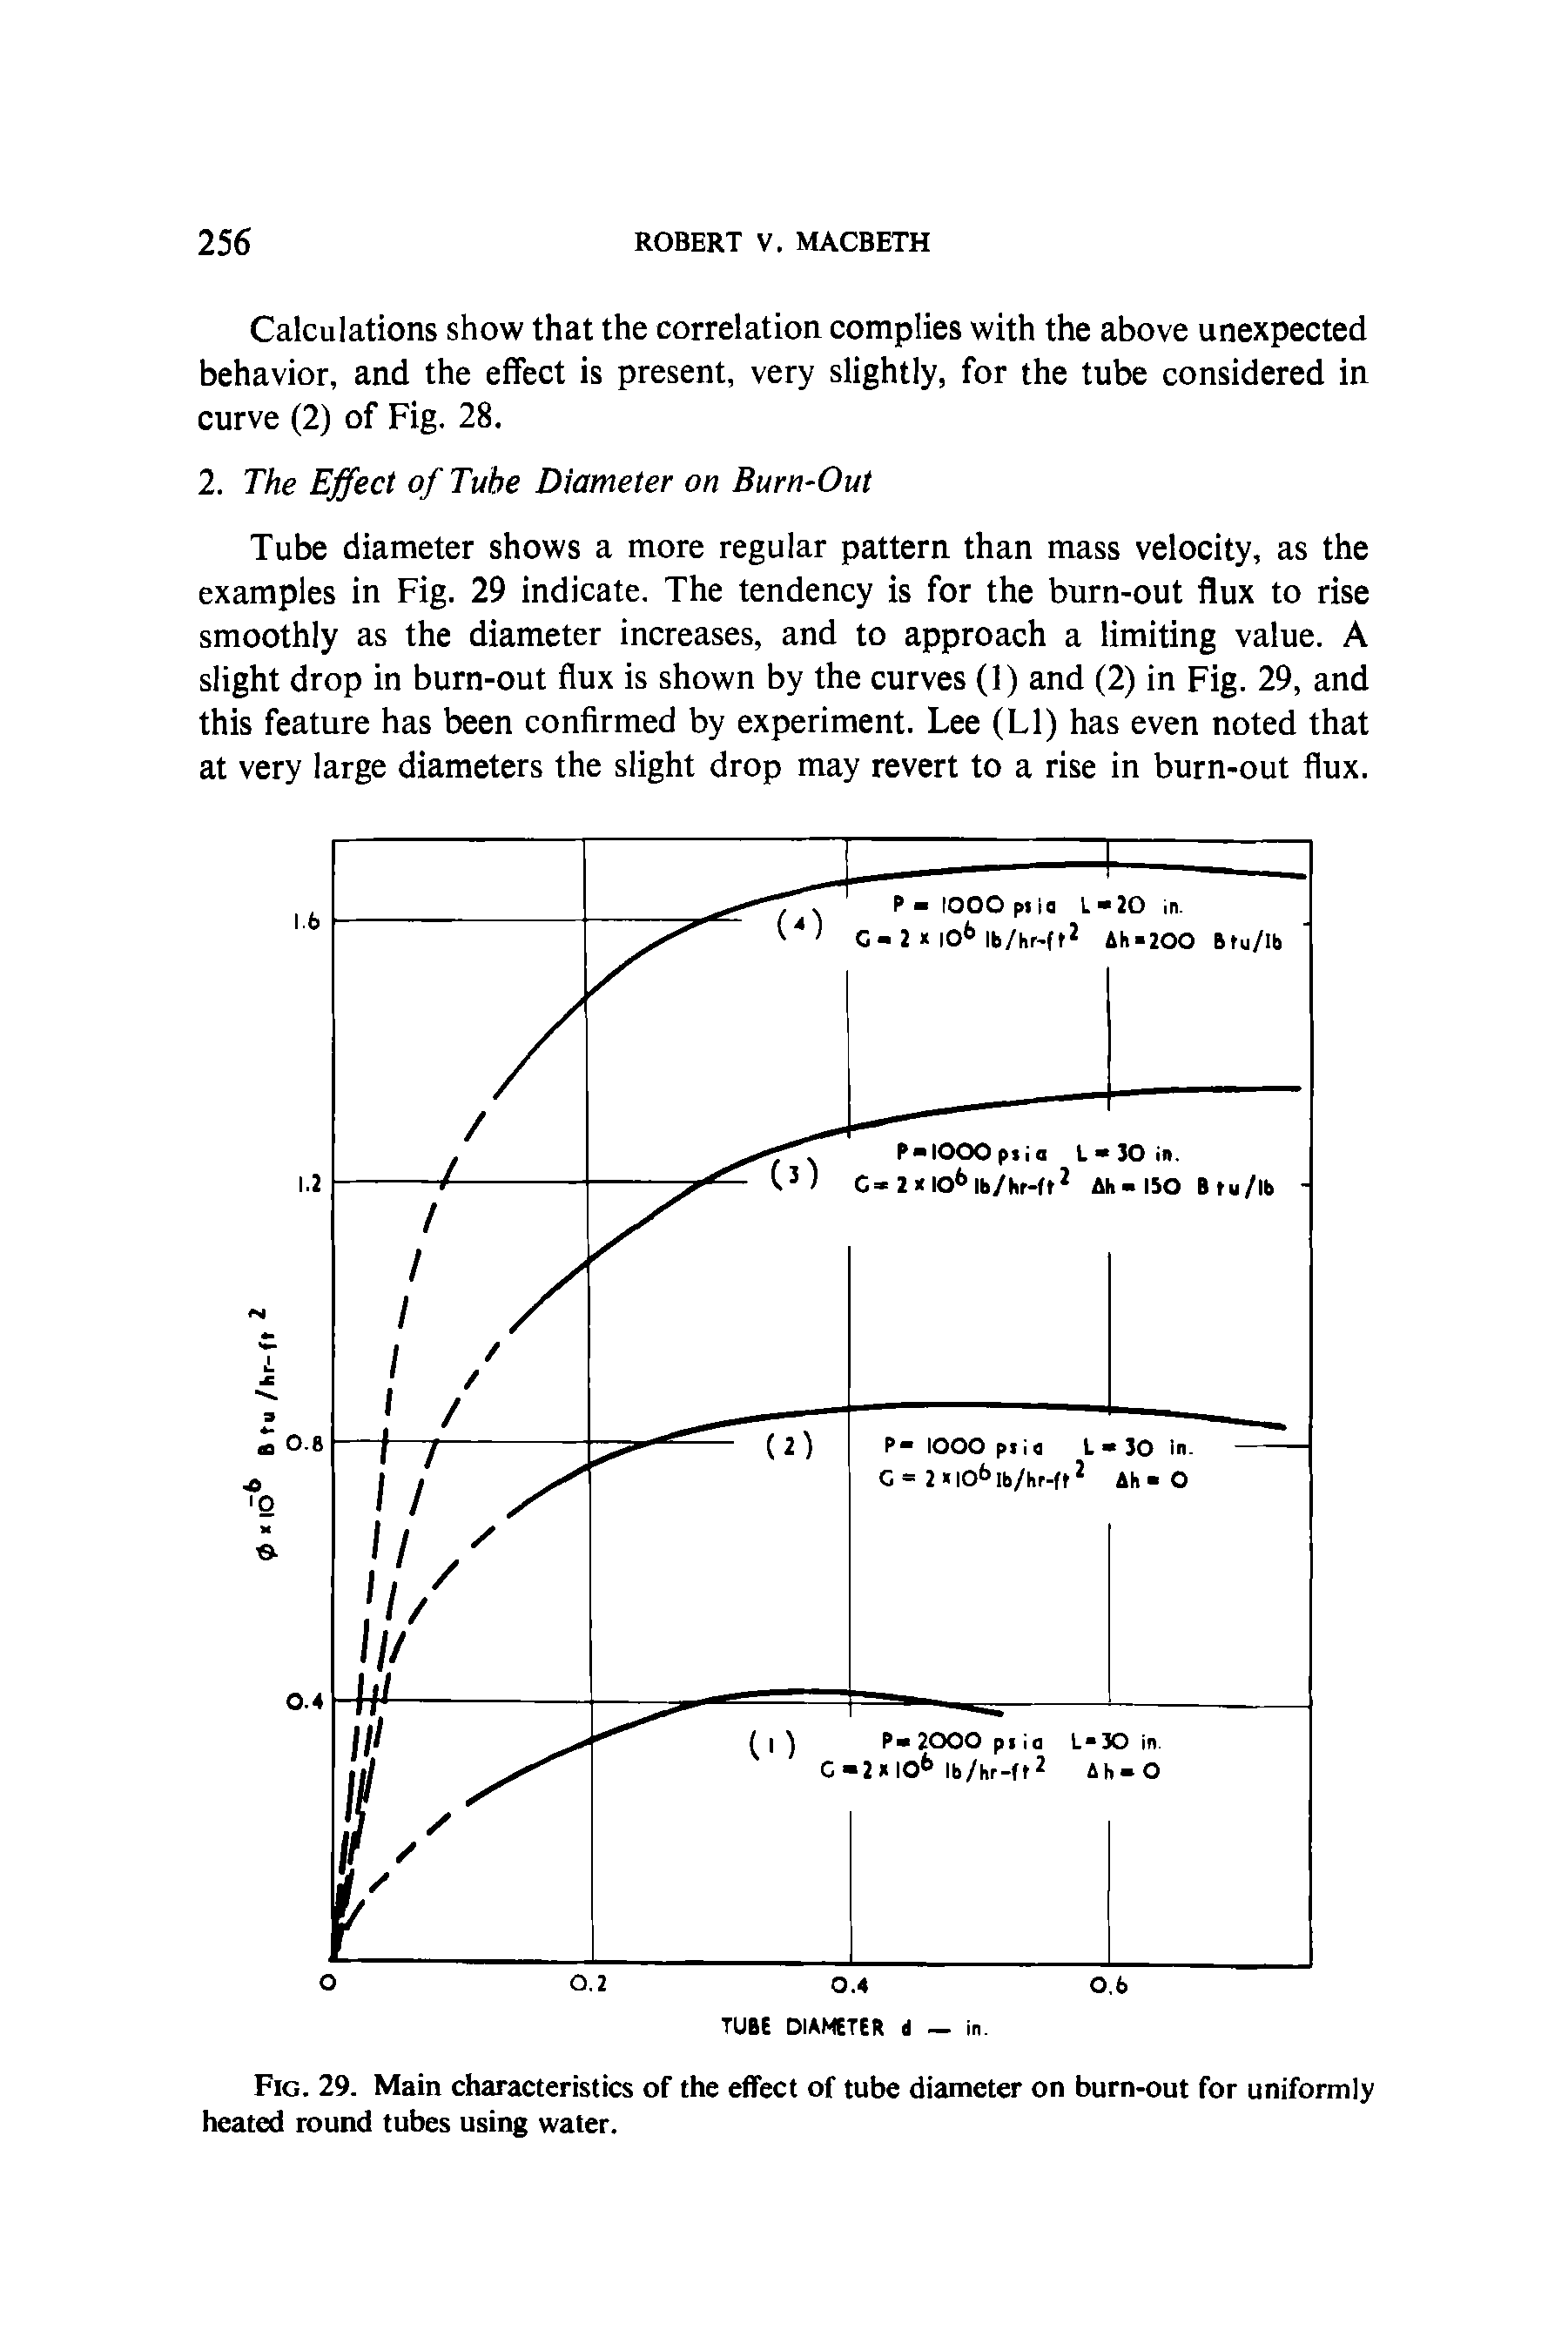 Fig. 29. Main characteristics of the effect of tube diameter on burn-out for uniformly heated round tubes using water.